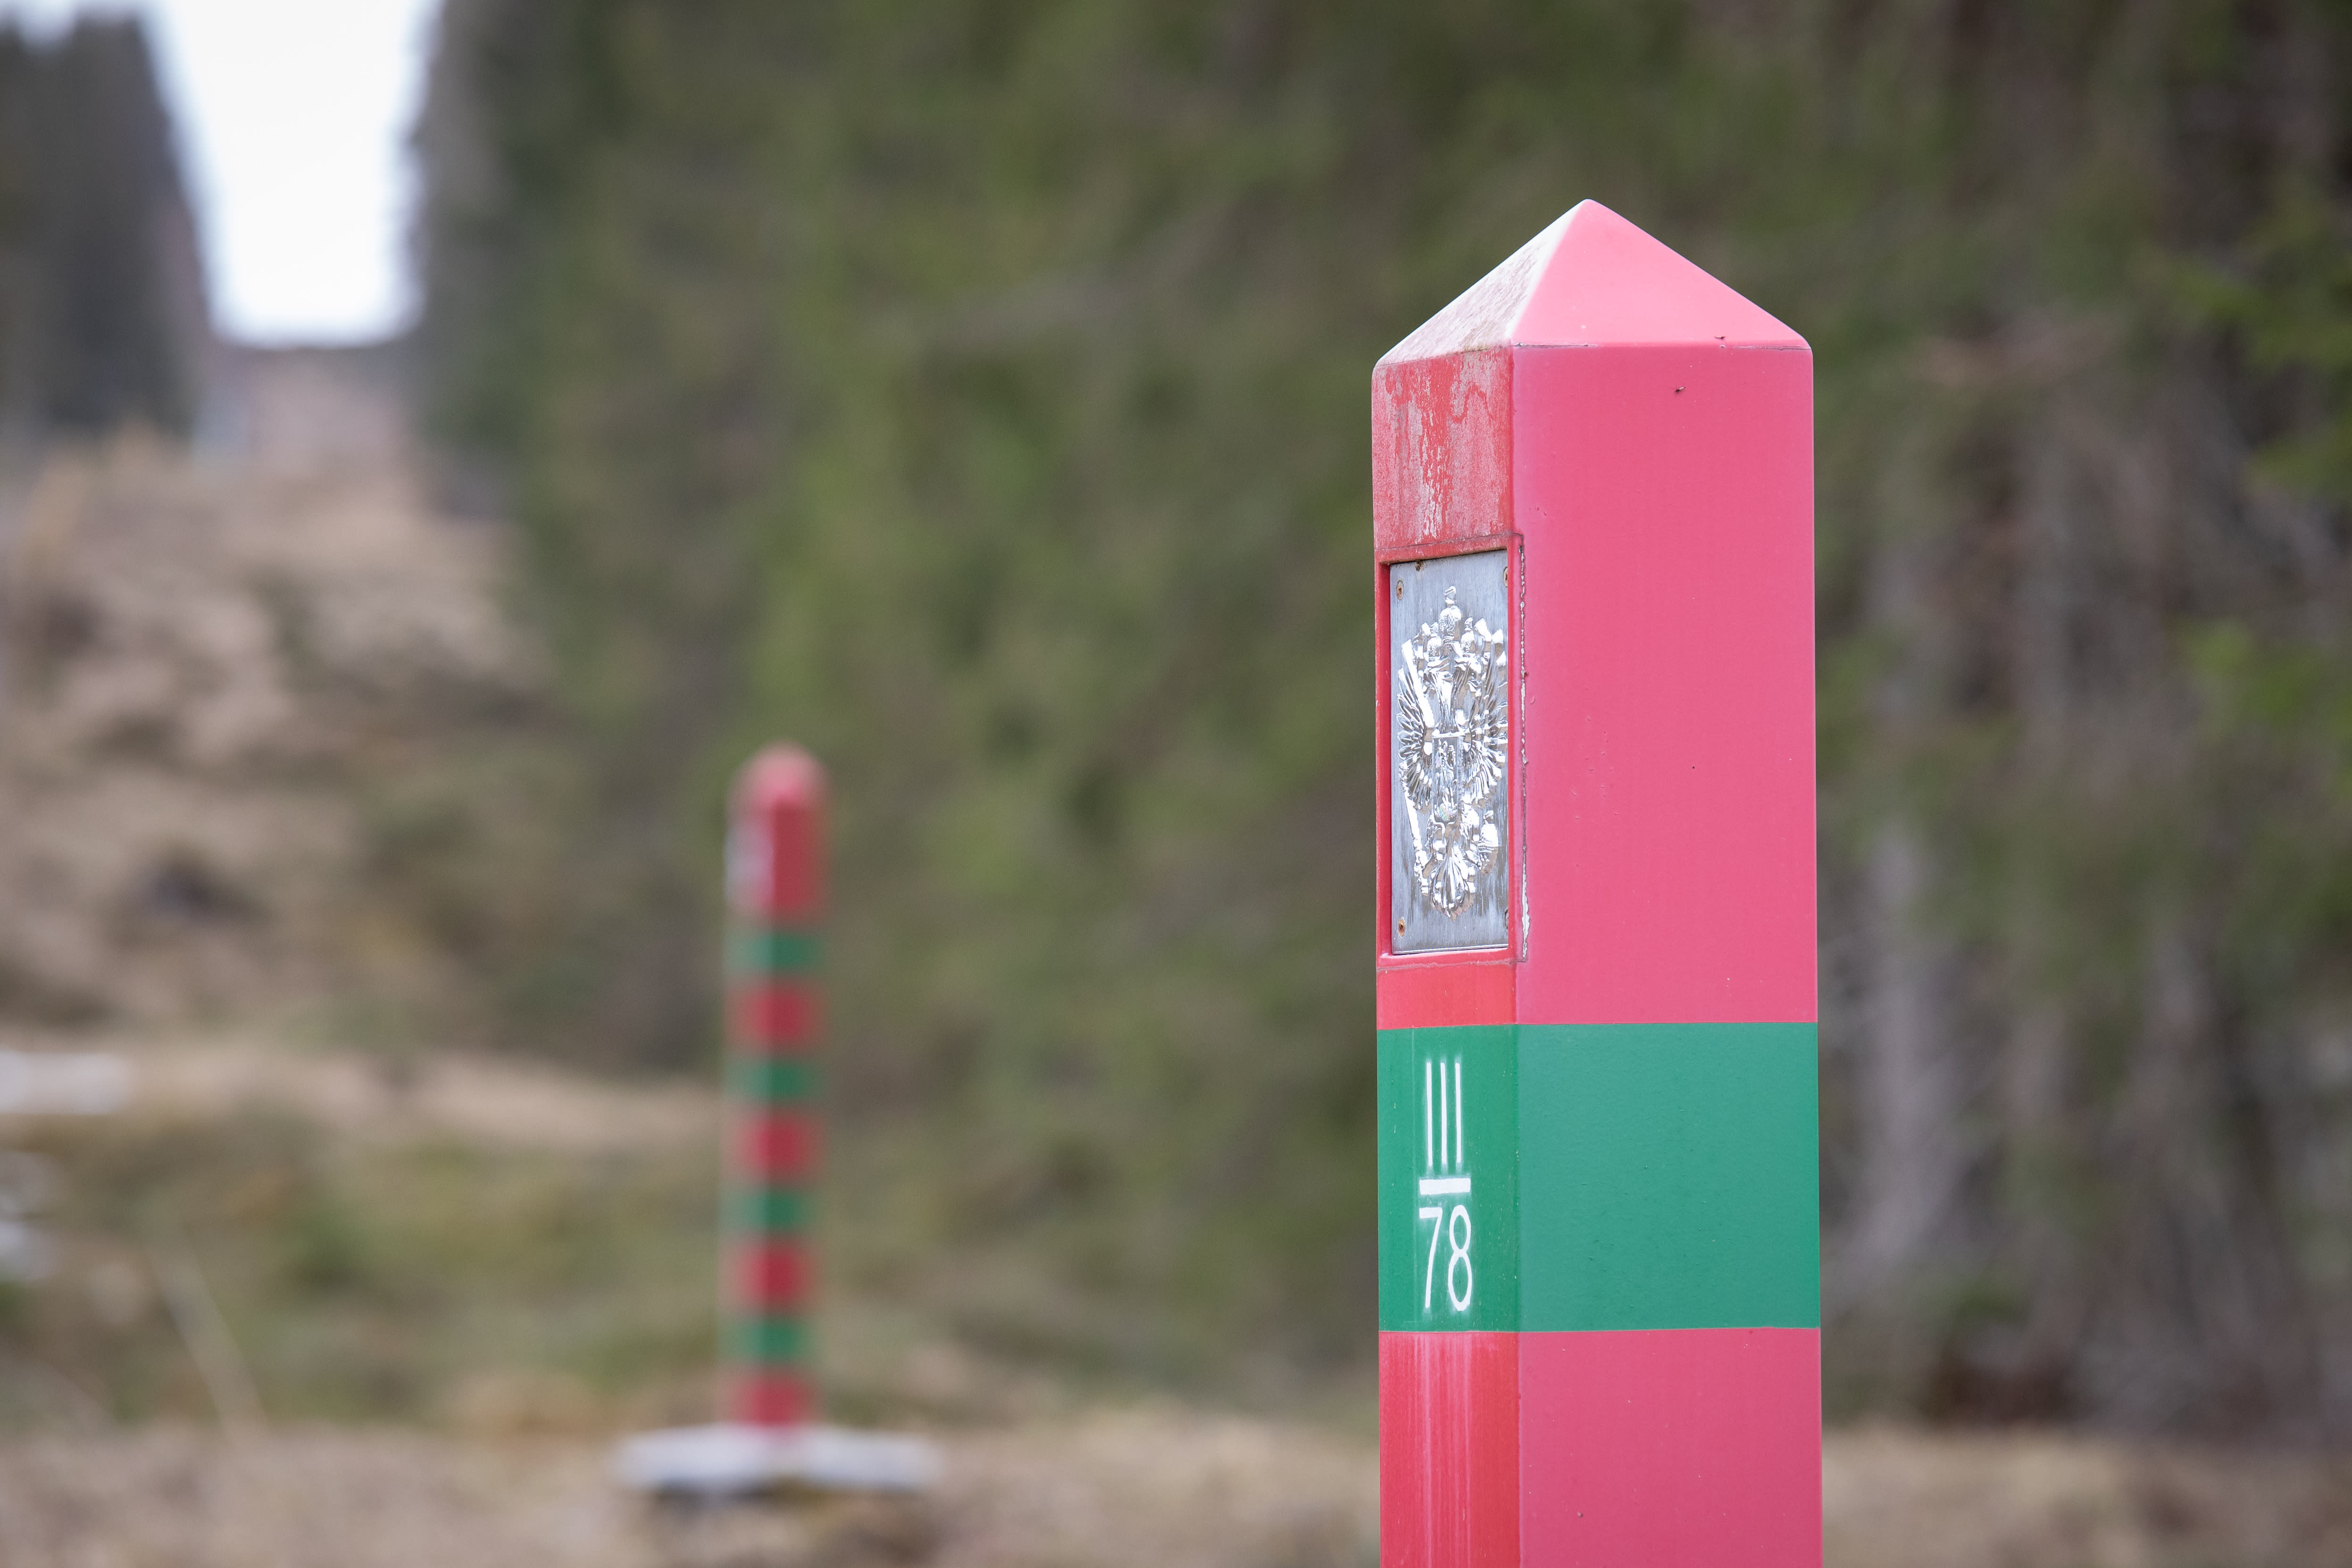 An increase in unauthorized crossings, says the Southeastern Finland Border Guard